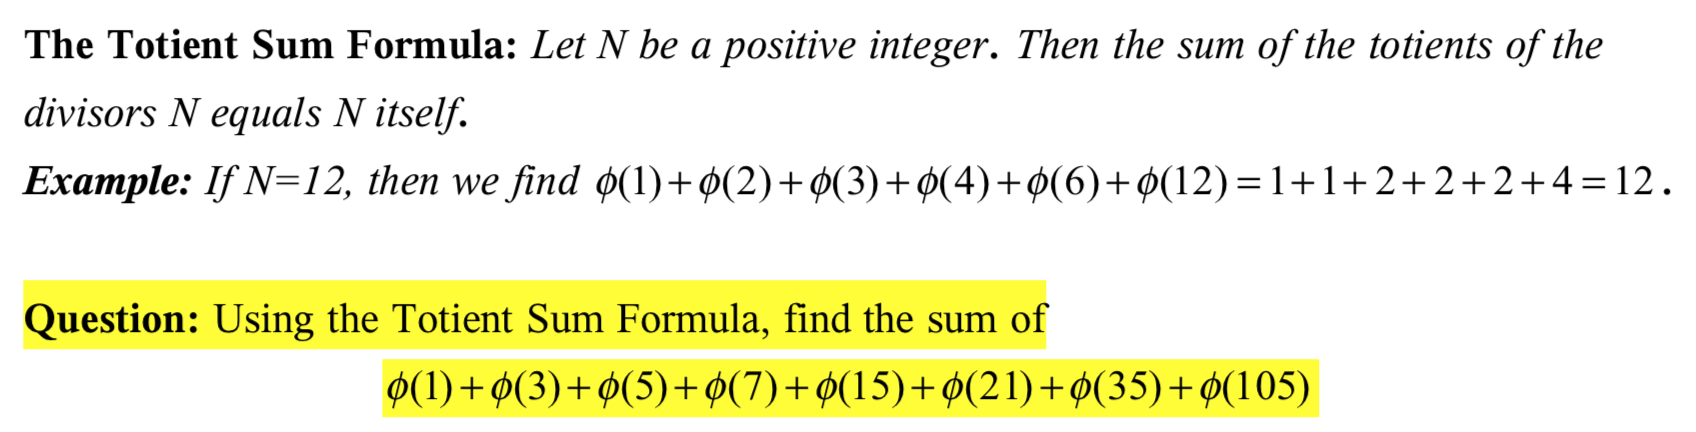 The Totient Sum Formula: Let N be a positive integer. Then the sum of the totients of the
divisors N equals N itself.
Example: If N=12, then we find ø(1)+ø(2)+¢(3)+ø(4)+¢(6)+¢(12)=1+1+2+2+2+4 = 12.
Question: Using the Totient Sum Formula, find the sum of
Ø(1)+ø(3)+ø(5)+ø(7)+ø(15)+ Ø(21)+ø(35)+¢(105)
